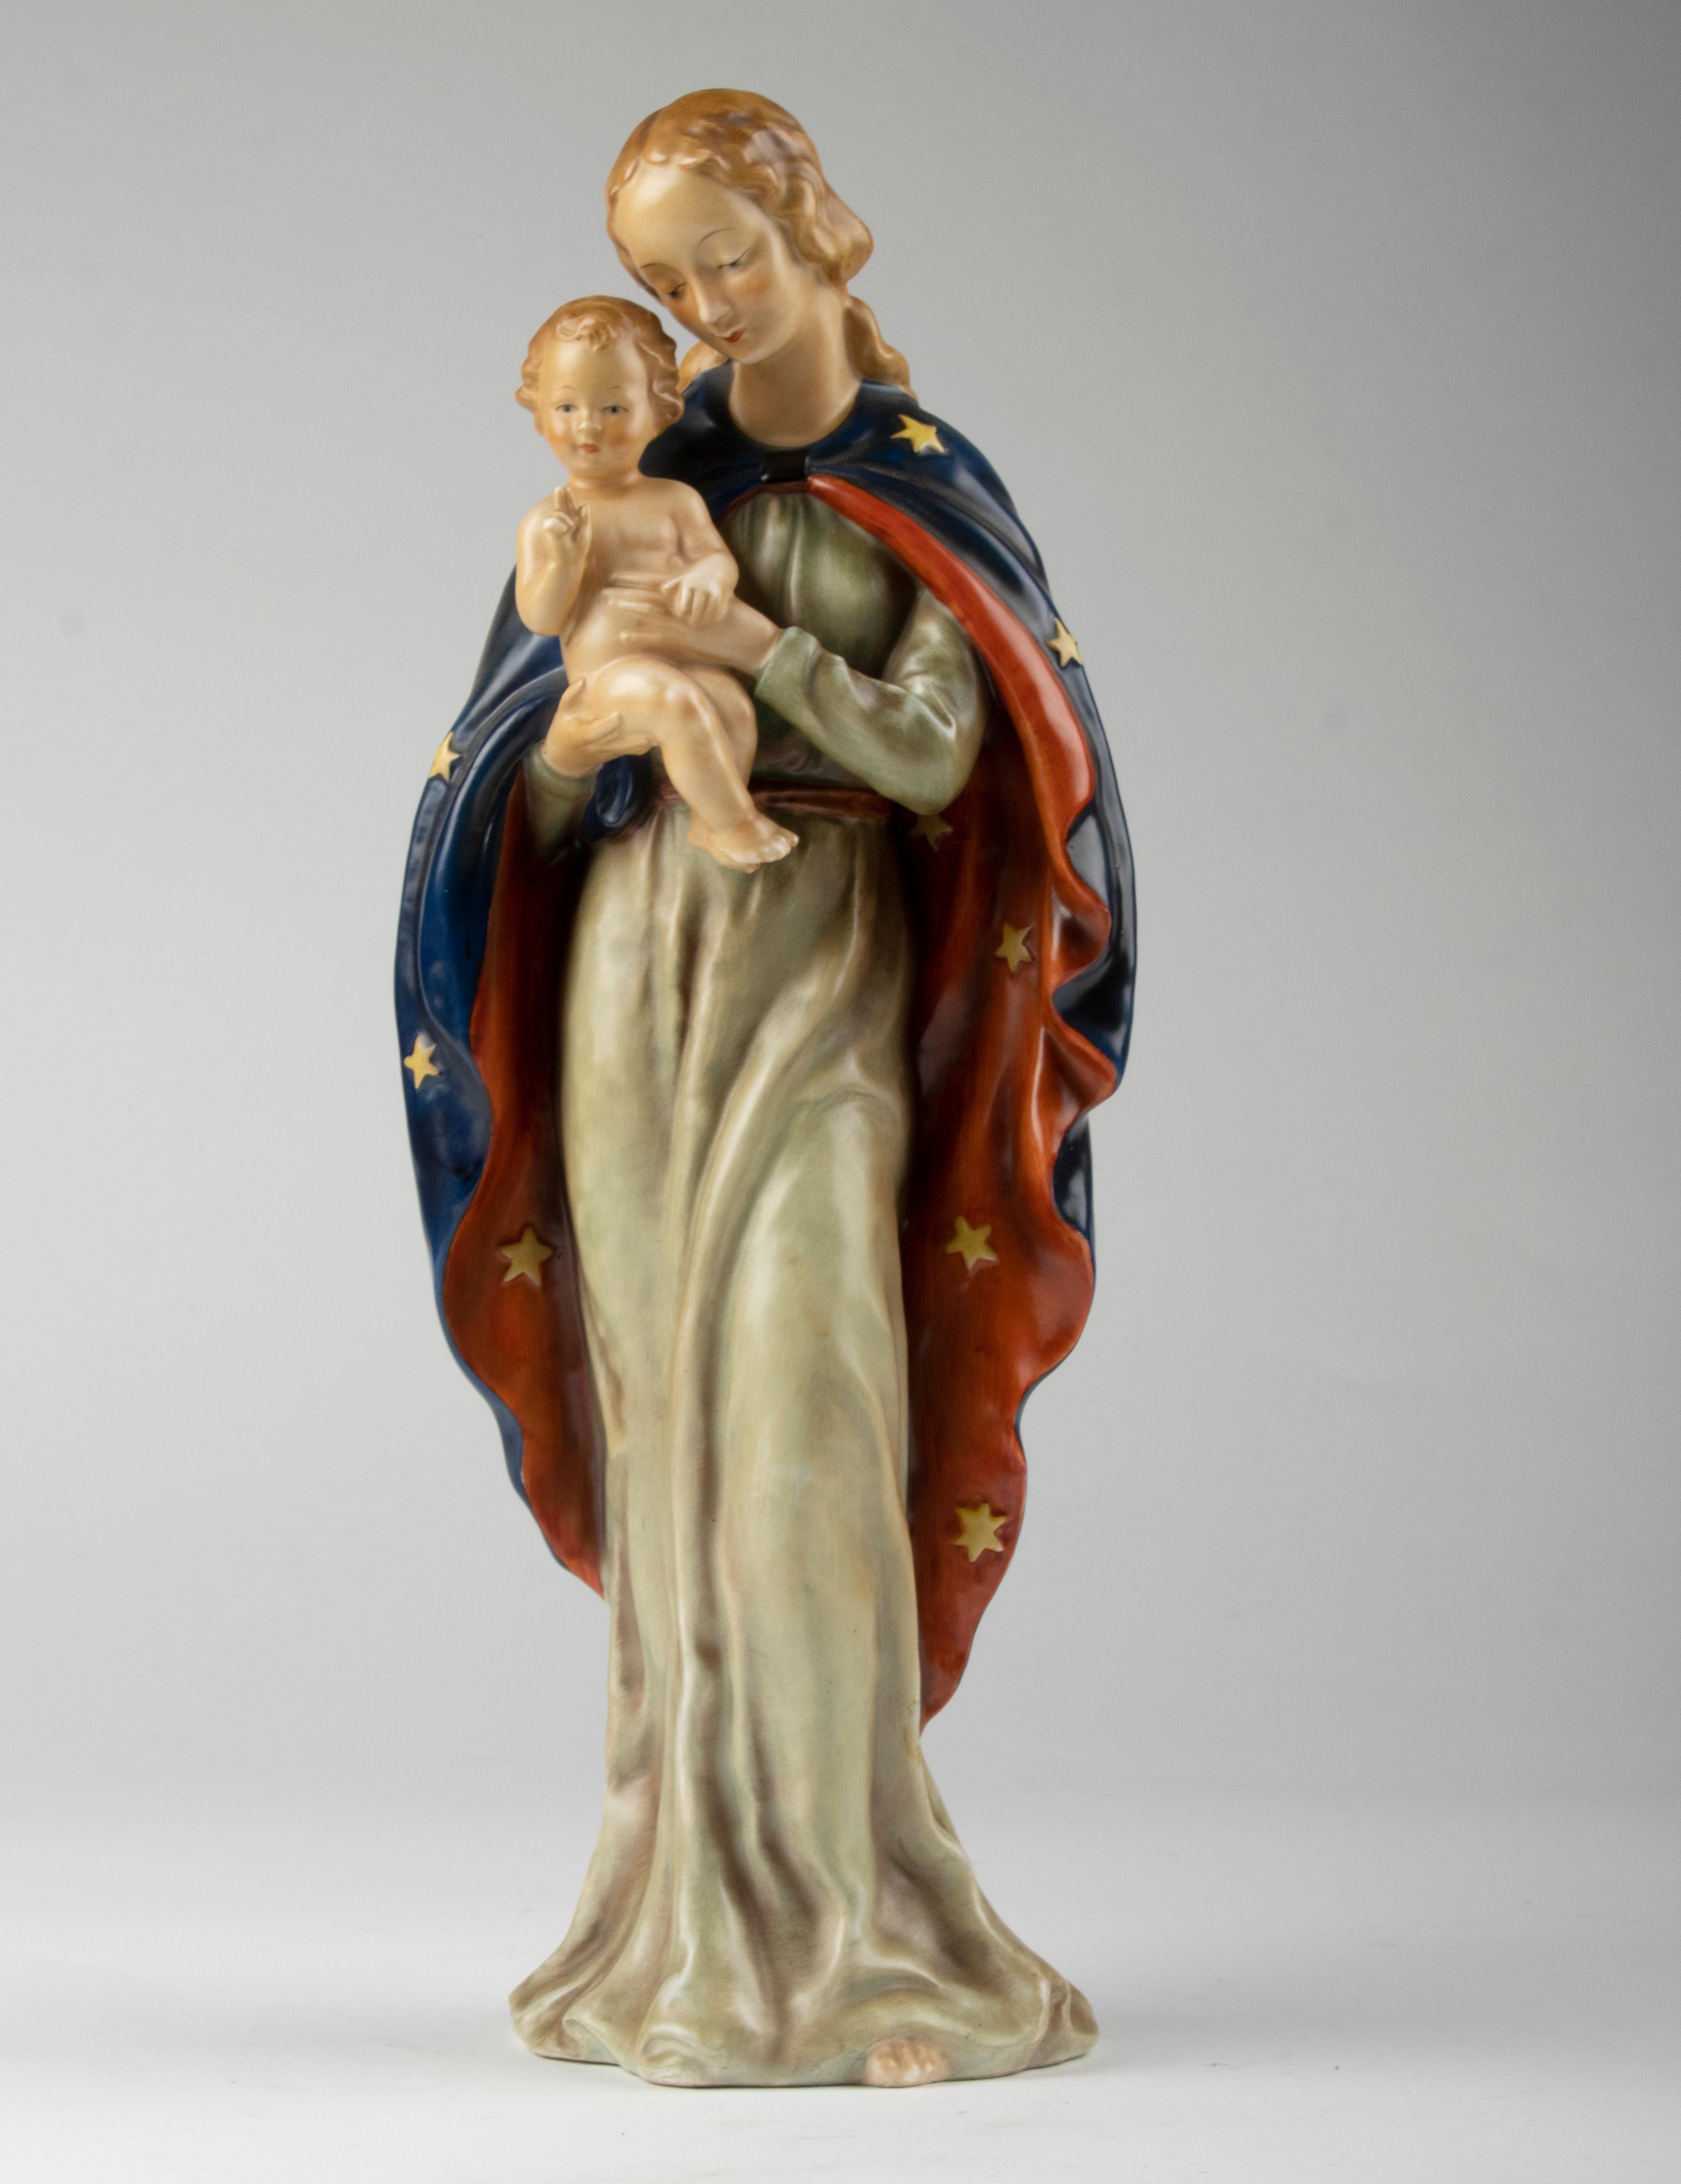 Beautiful porcelain statue of Mary with baby Jesus on her arm. The statue is hand painted in beautiful colors. The statue is marked on the bottom with the Bee Mark by Goebel. The statue is in very good condition.